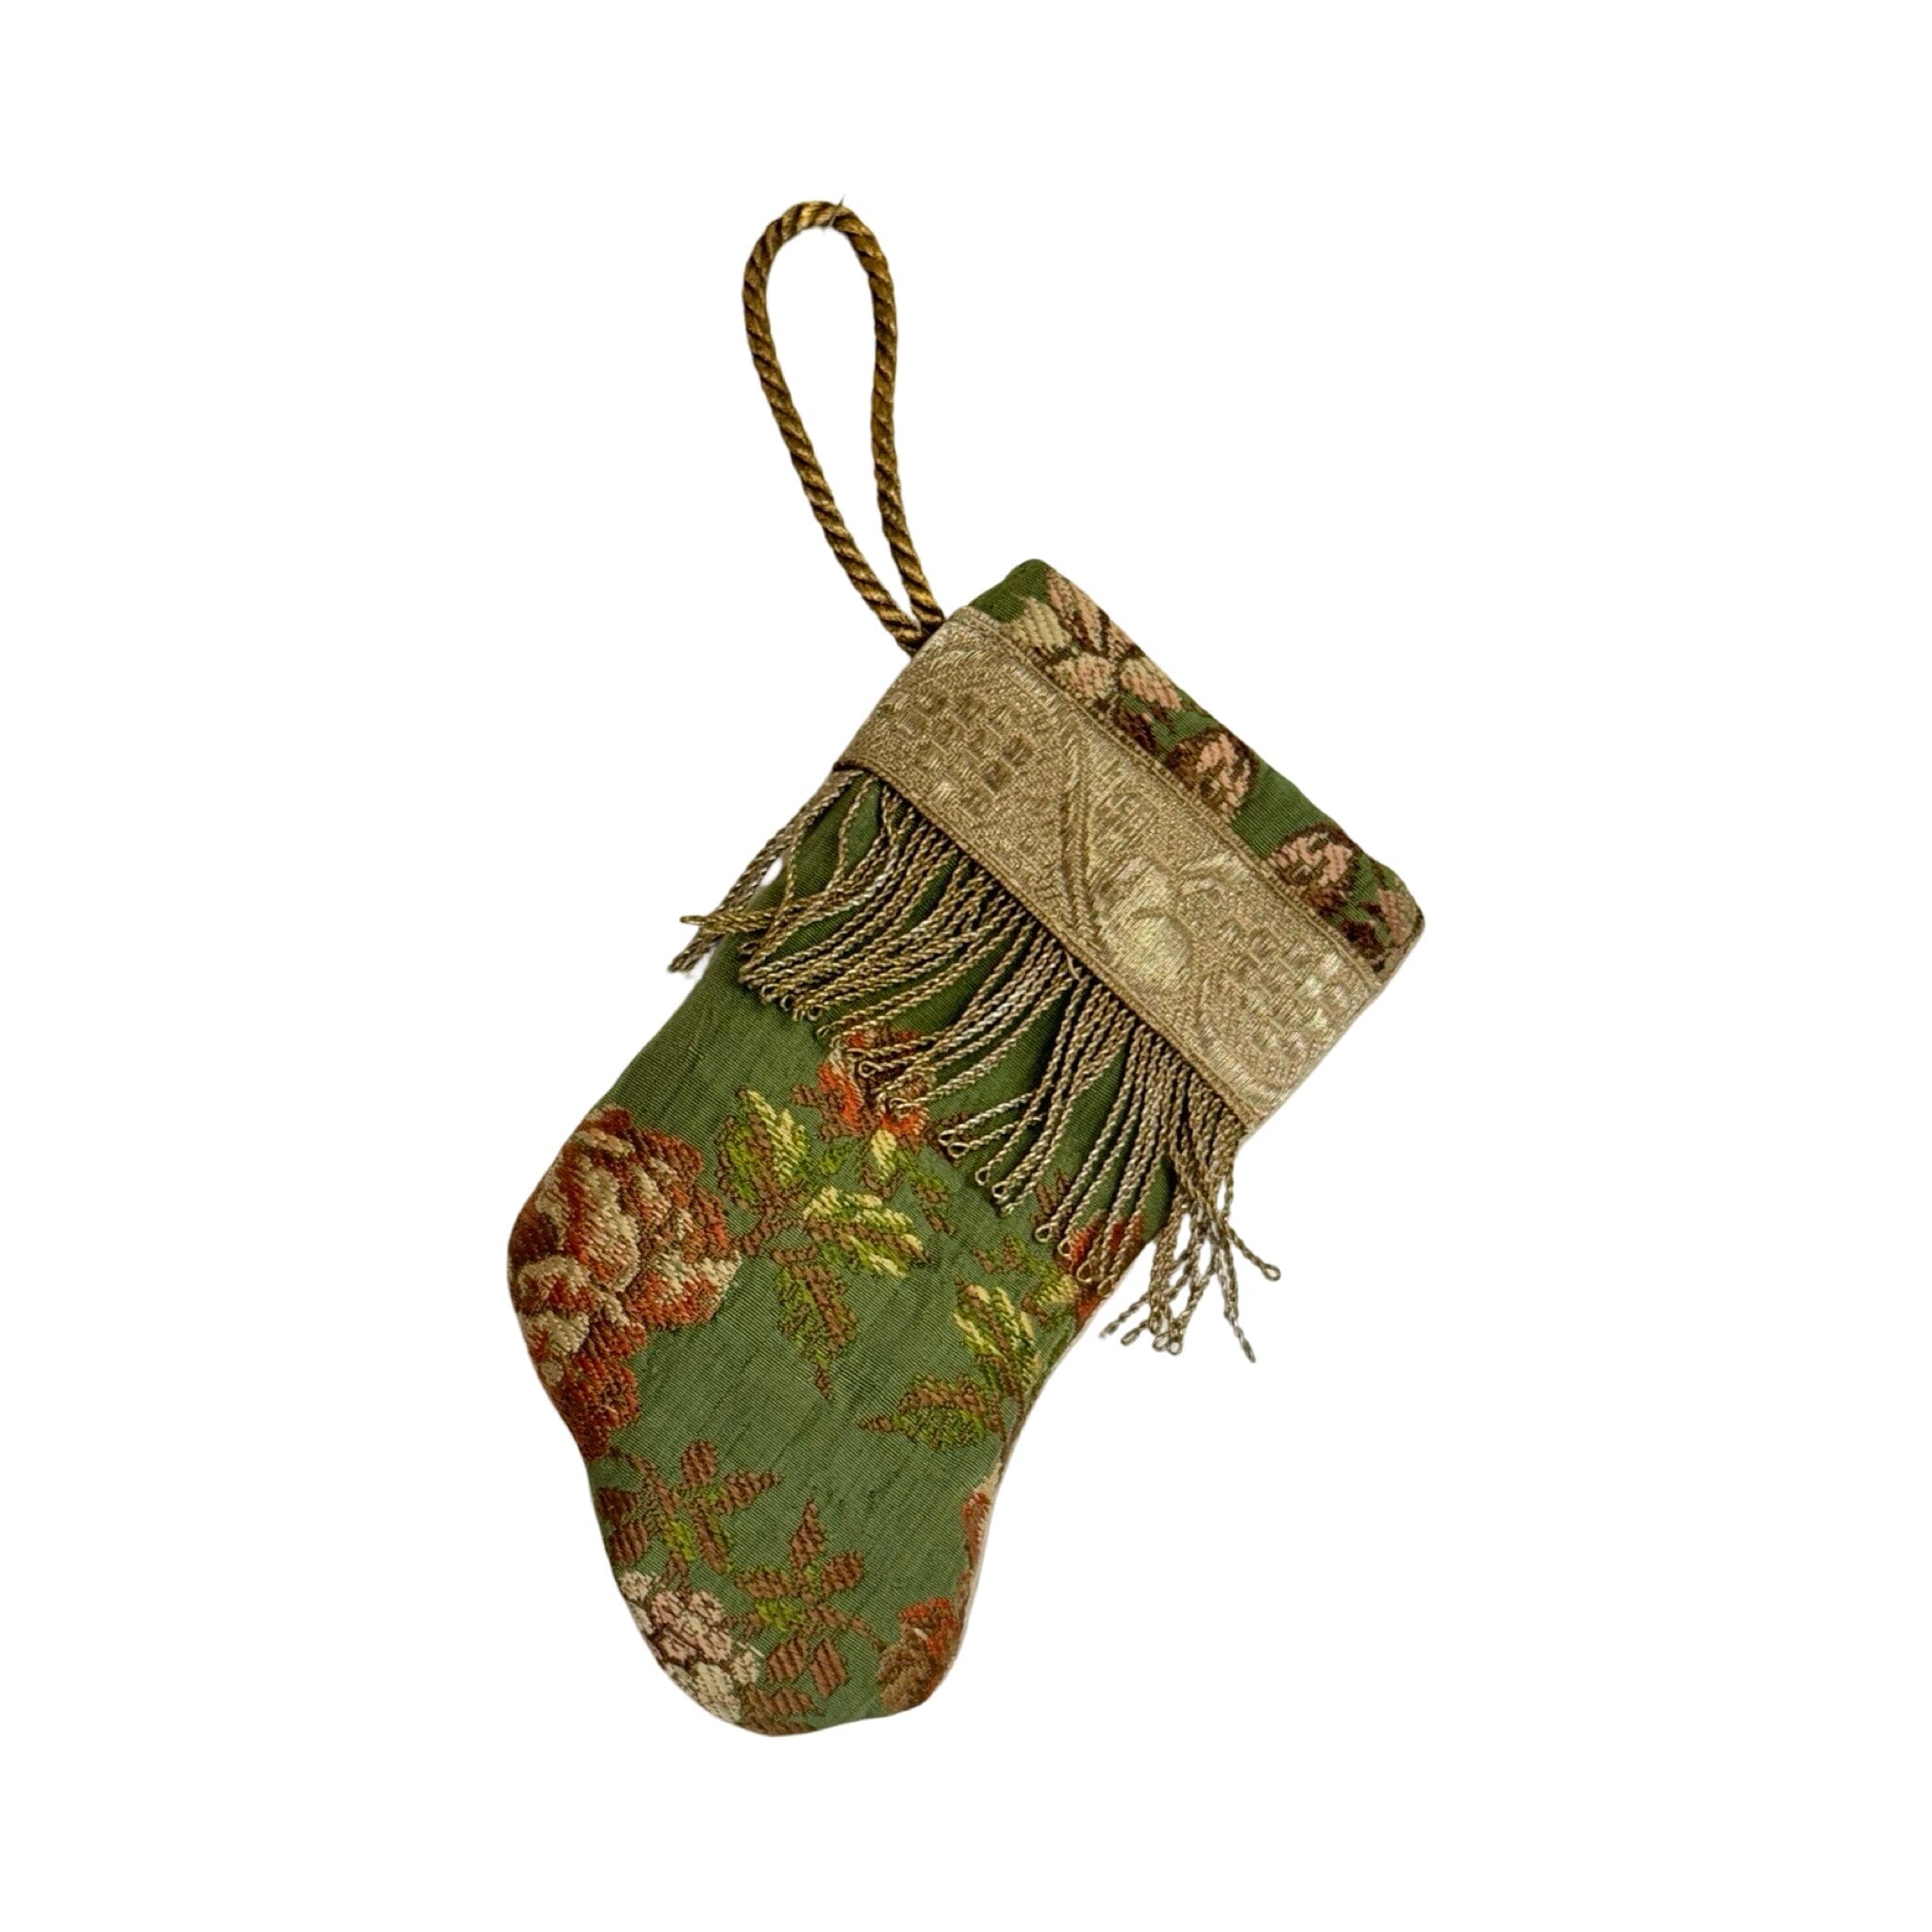 Handmade Mini Stocking Made From Vintage Fabric and Trims- Green Floral Ornament B. Viz Design B 